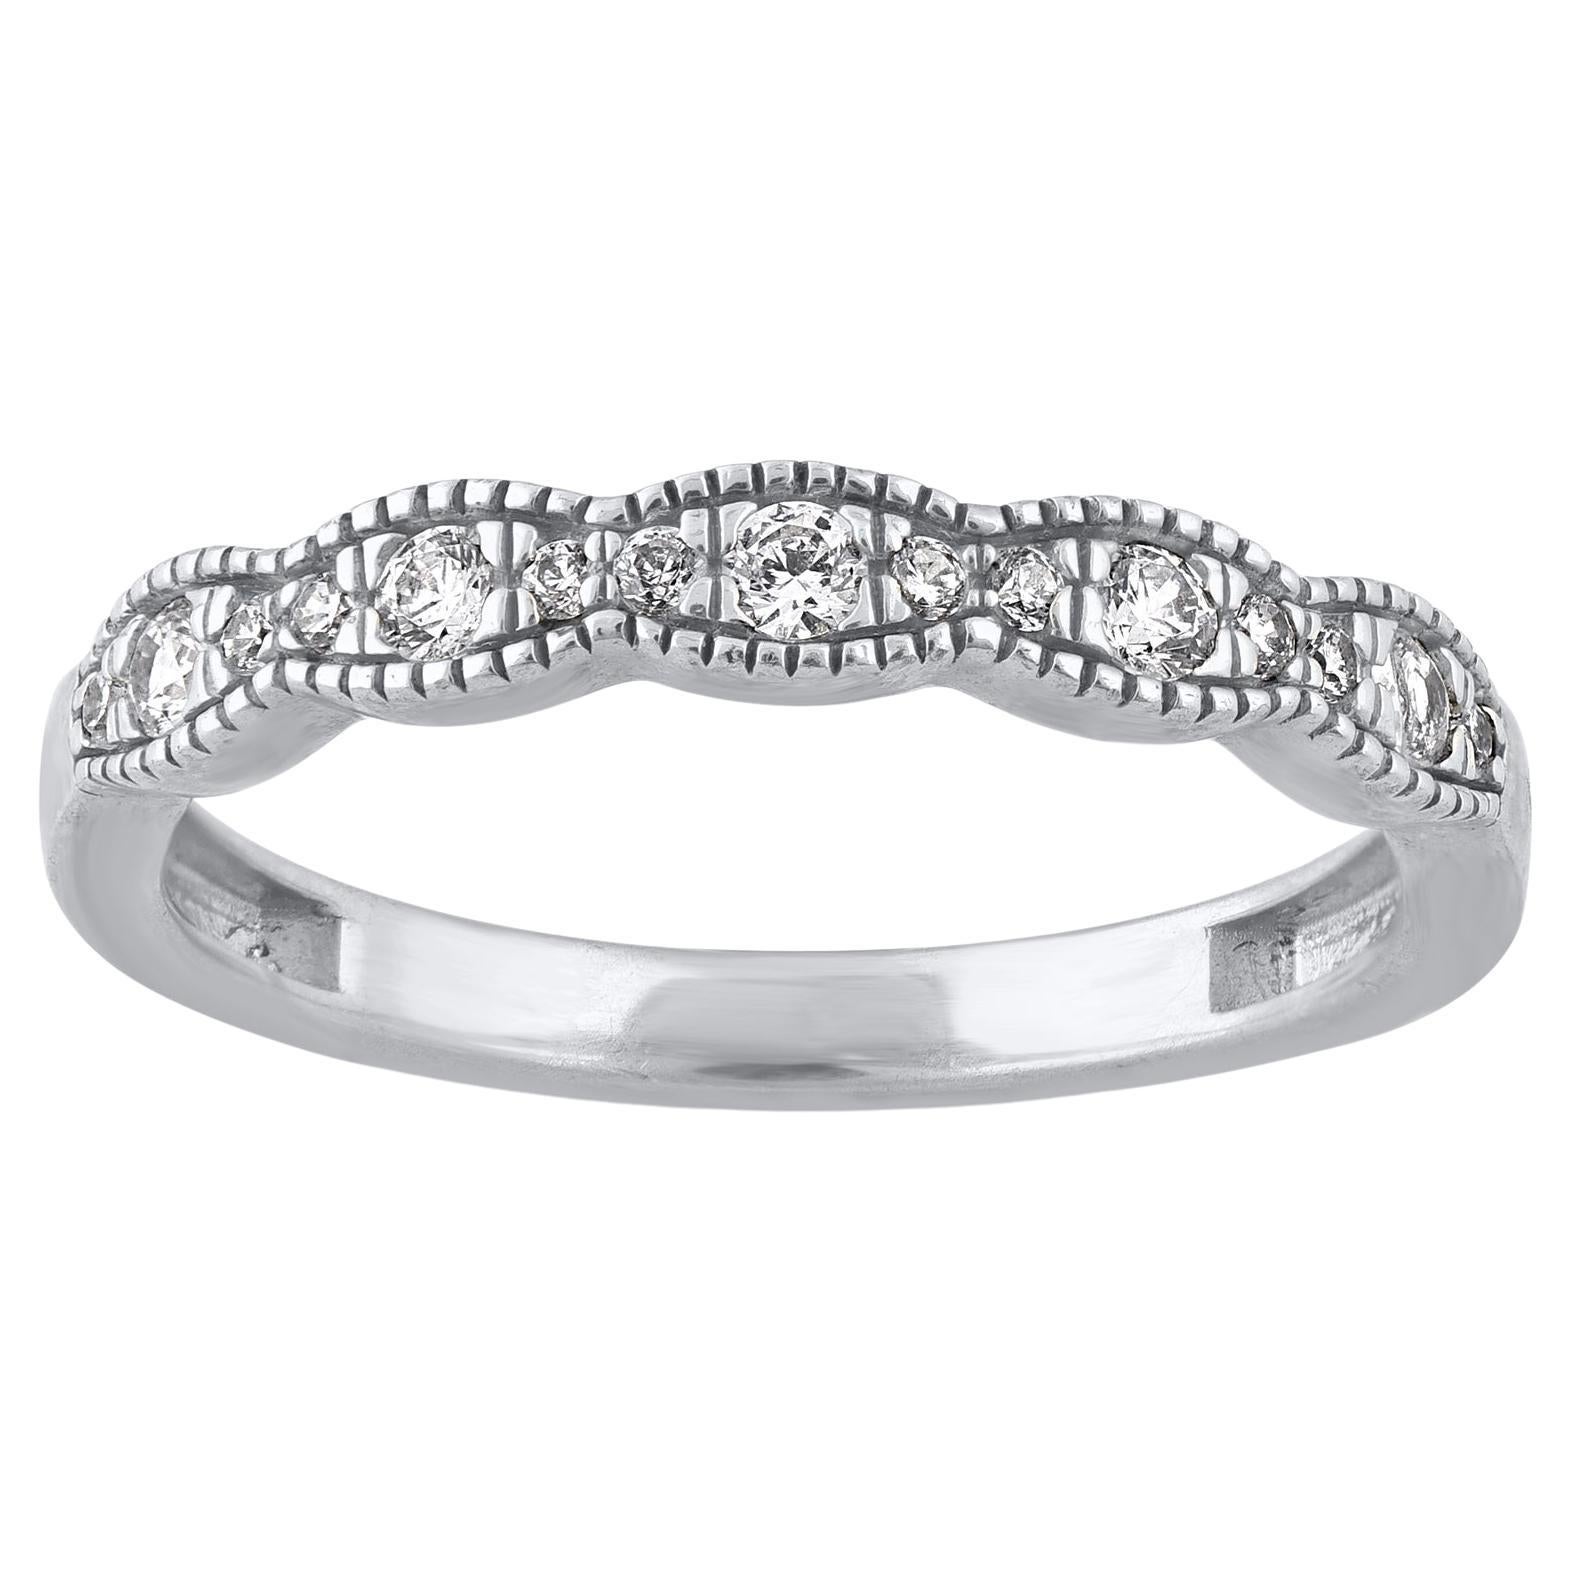 TJD 0.25 Carat Brilliant Diamond 14KT White Gold Stackable Wedding Band Ring For Sale